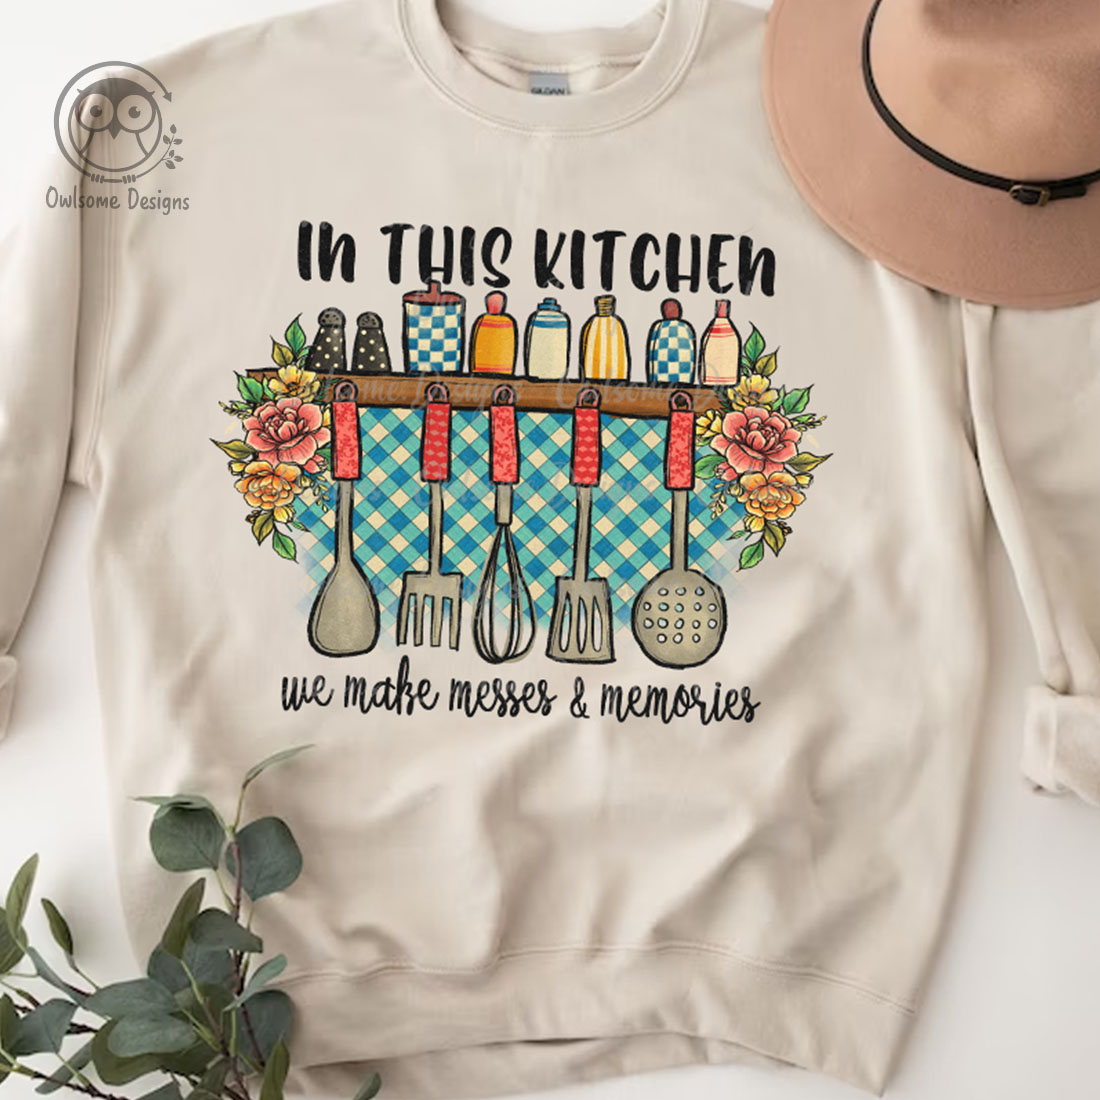 Image of a sweatshirt with a beautiful print with kitchen accessories.